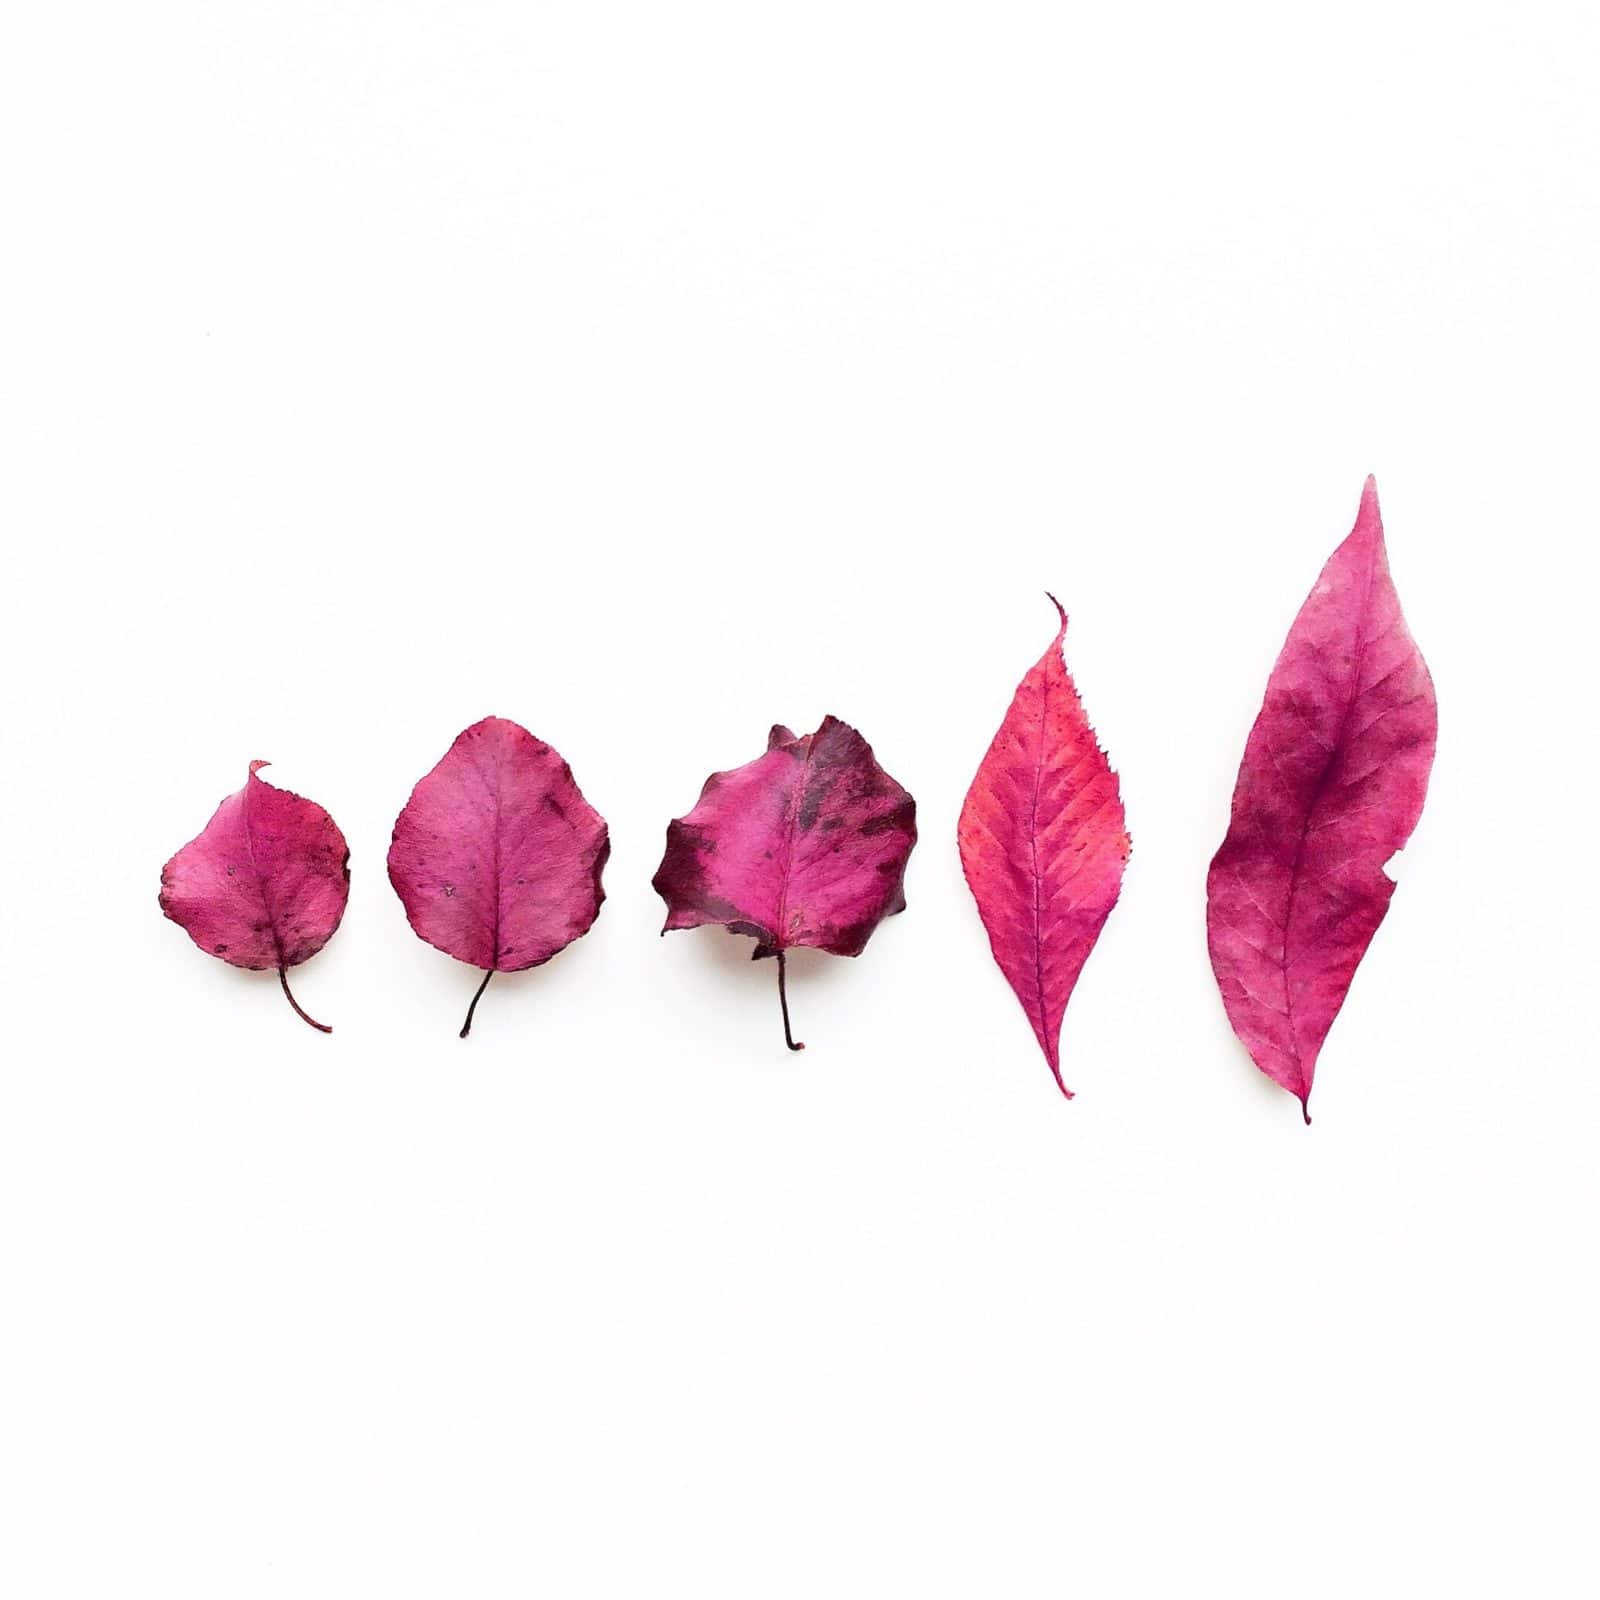 Creative edit: five pink fall leaves on a white background.